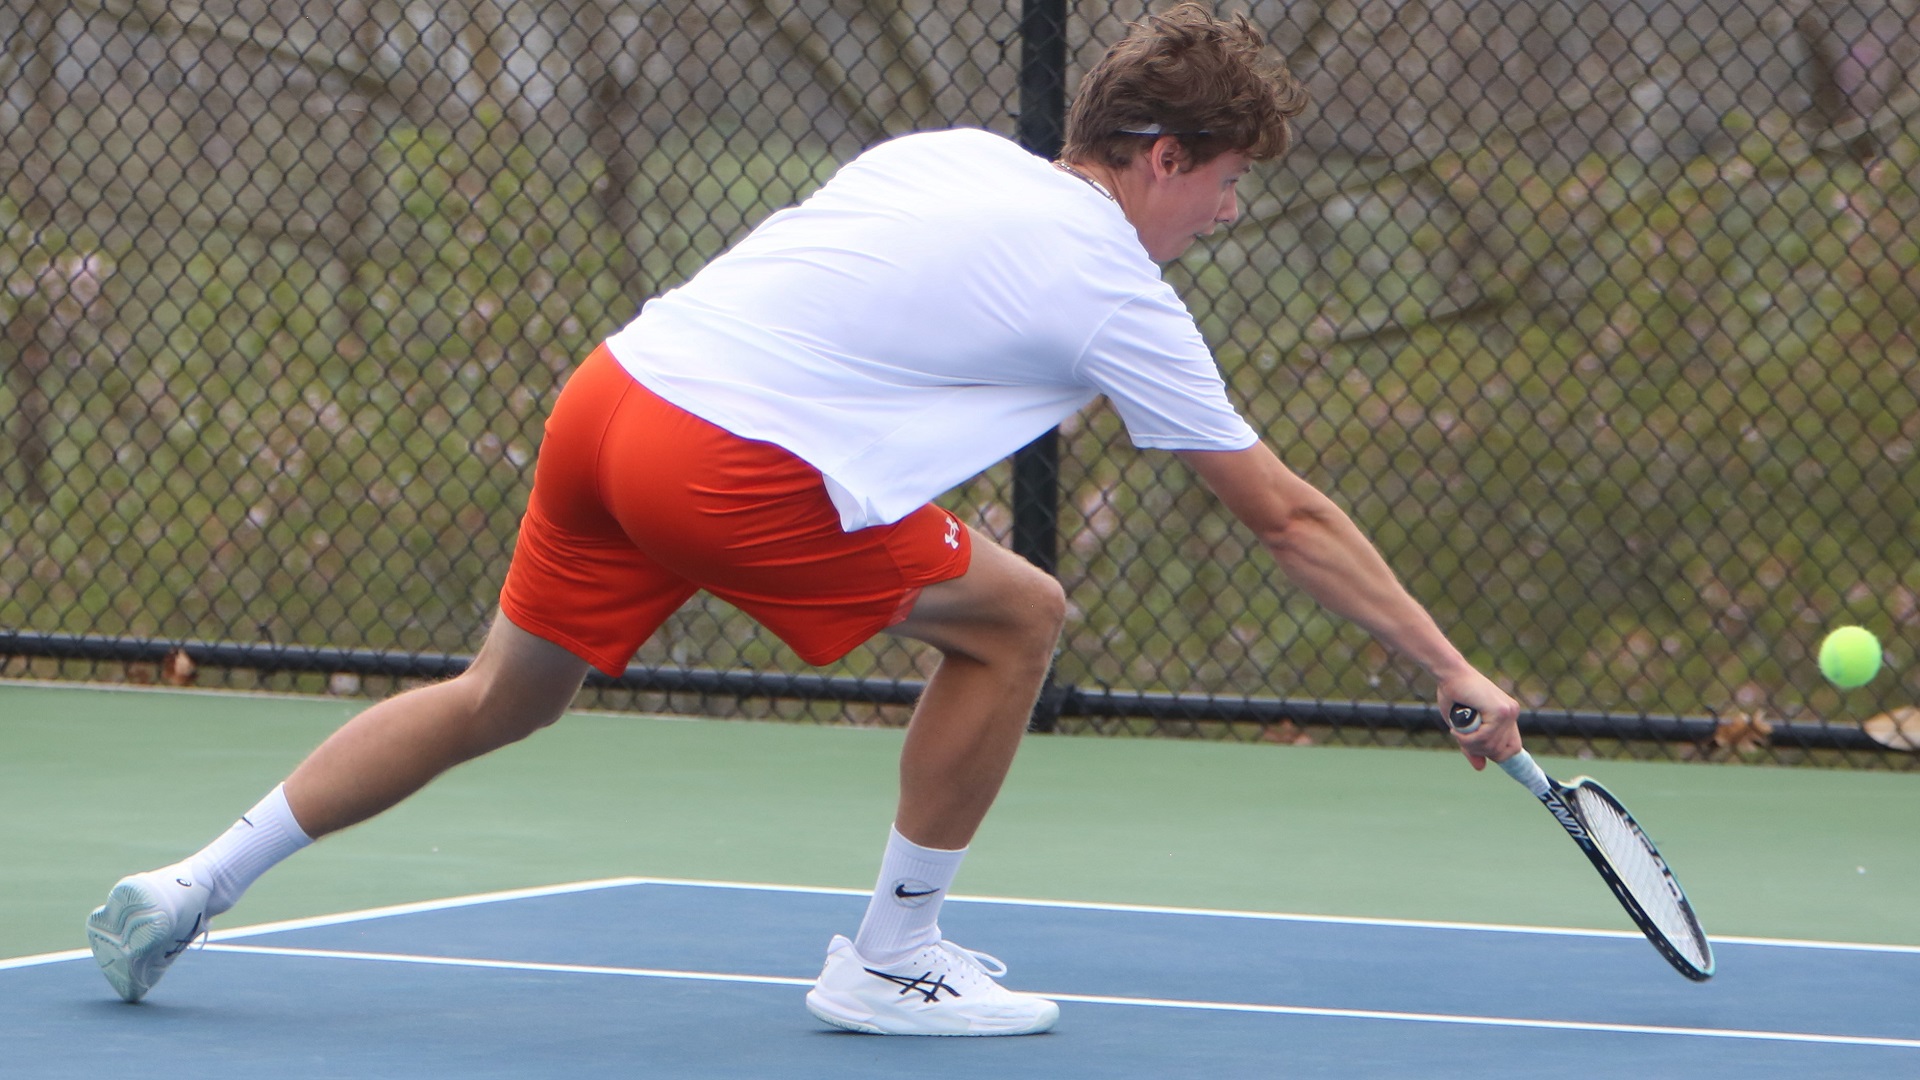 Carson-Newman takes delayed 5-2 win over Pioneers